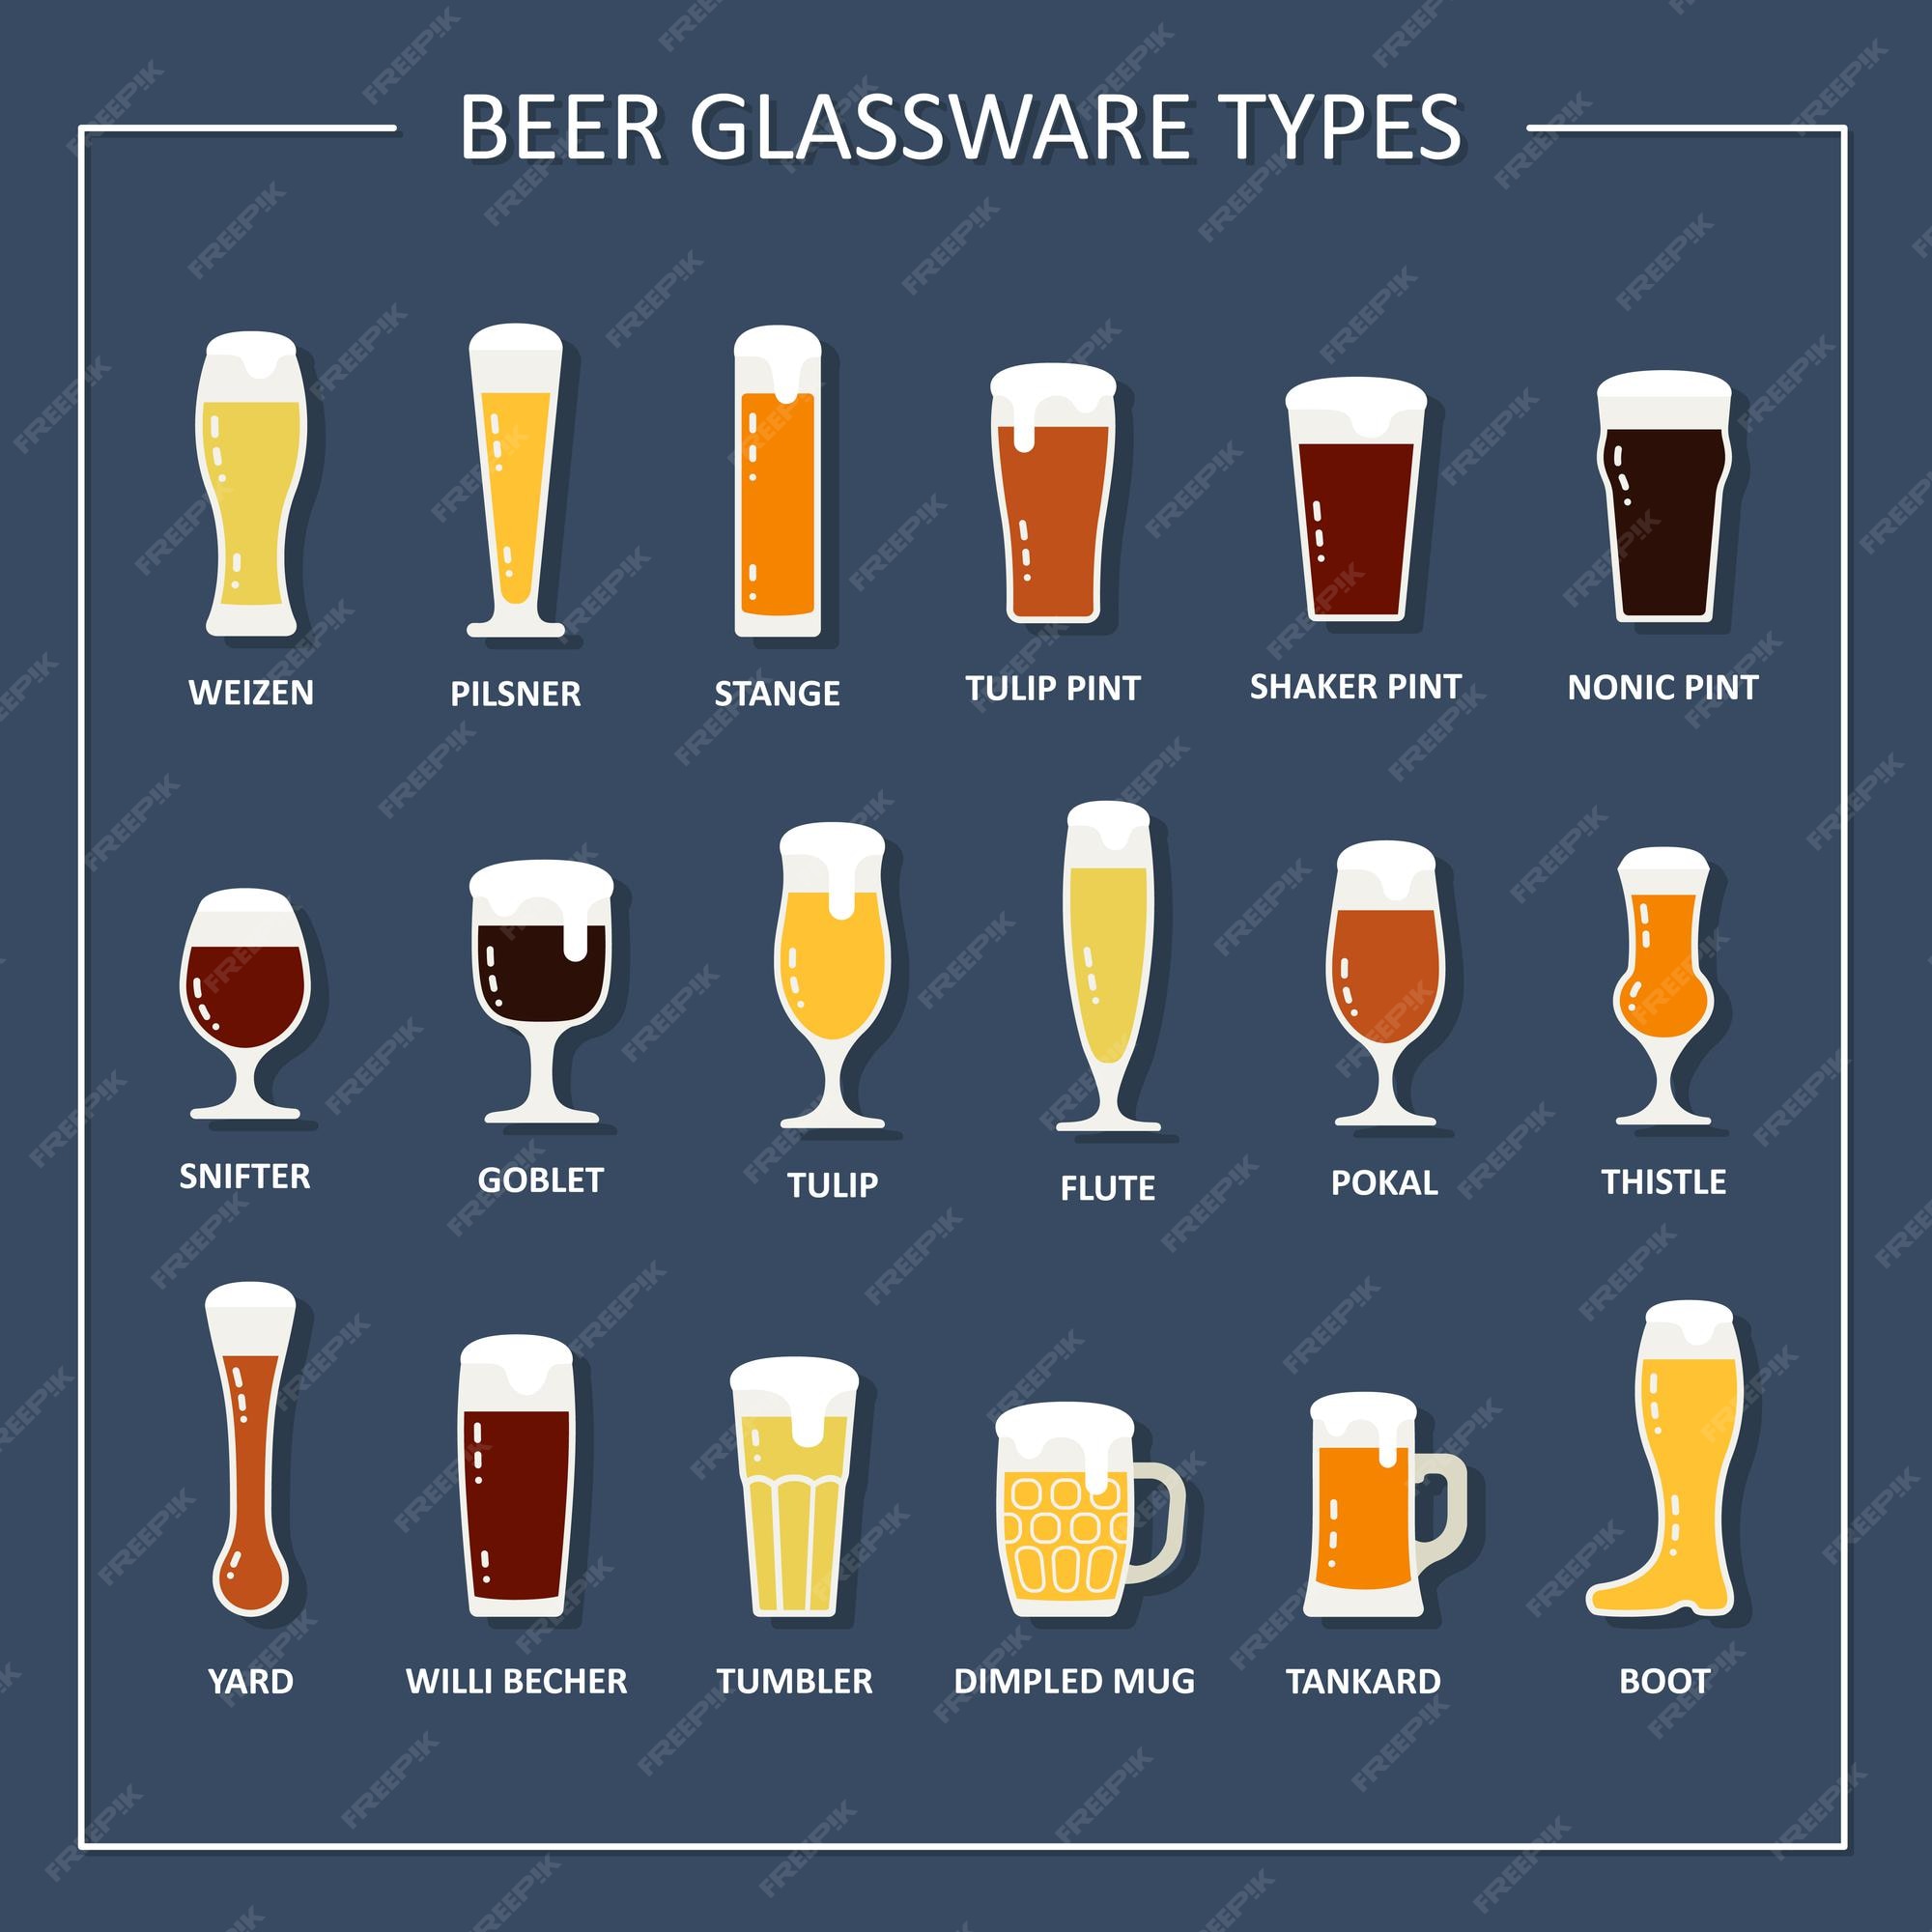 Beer glass types guide glasses and mugs Royalty Free Vector